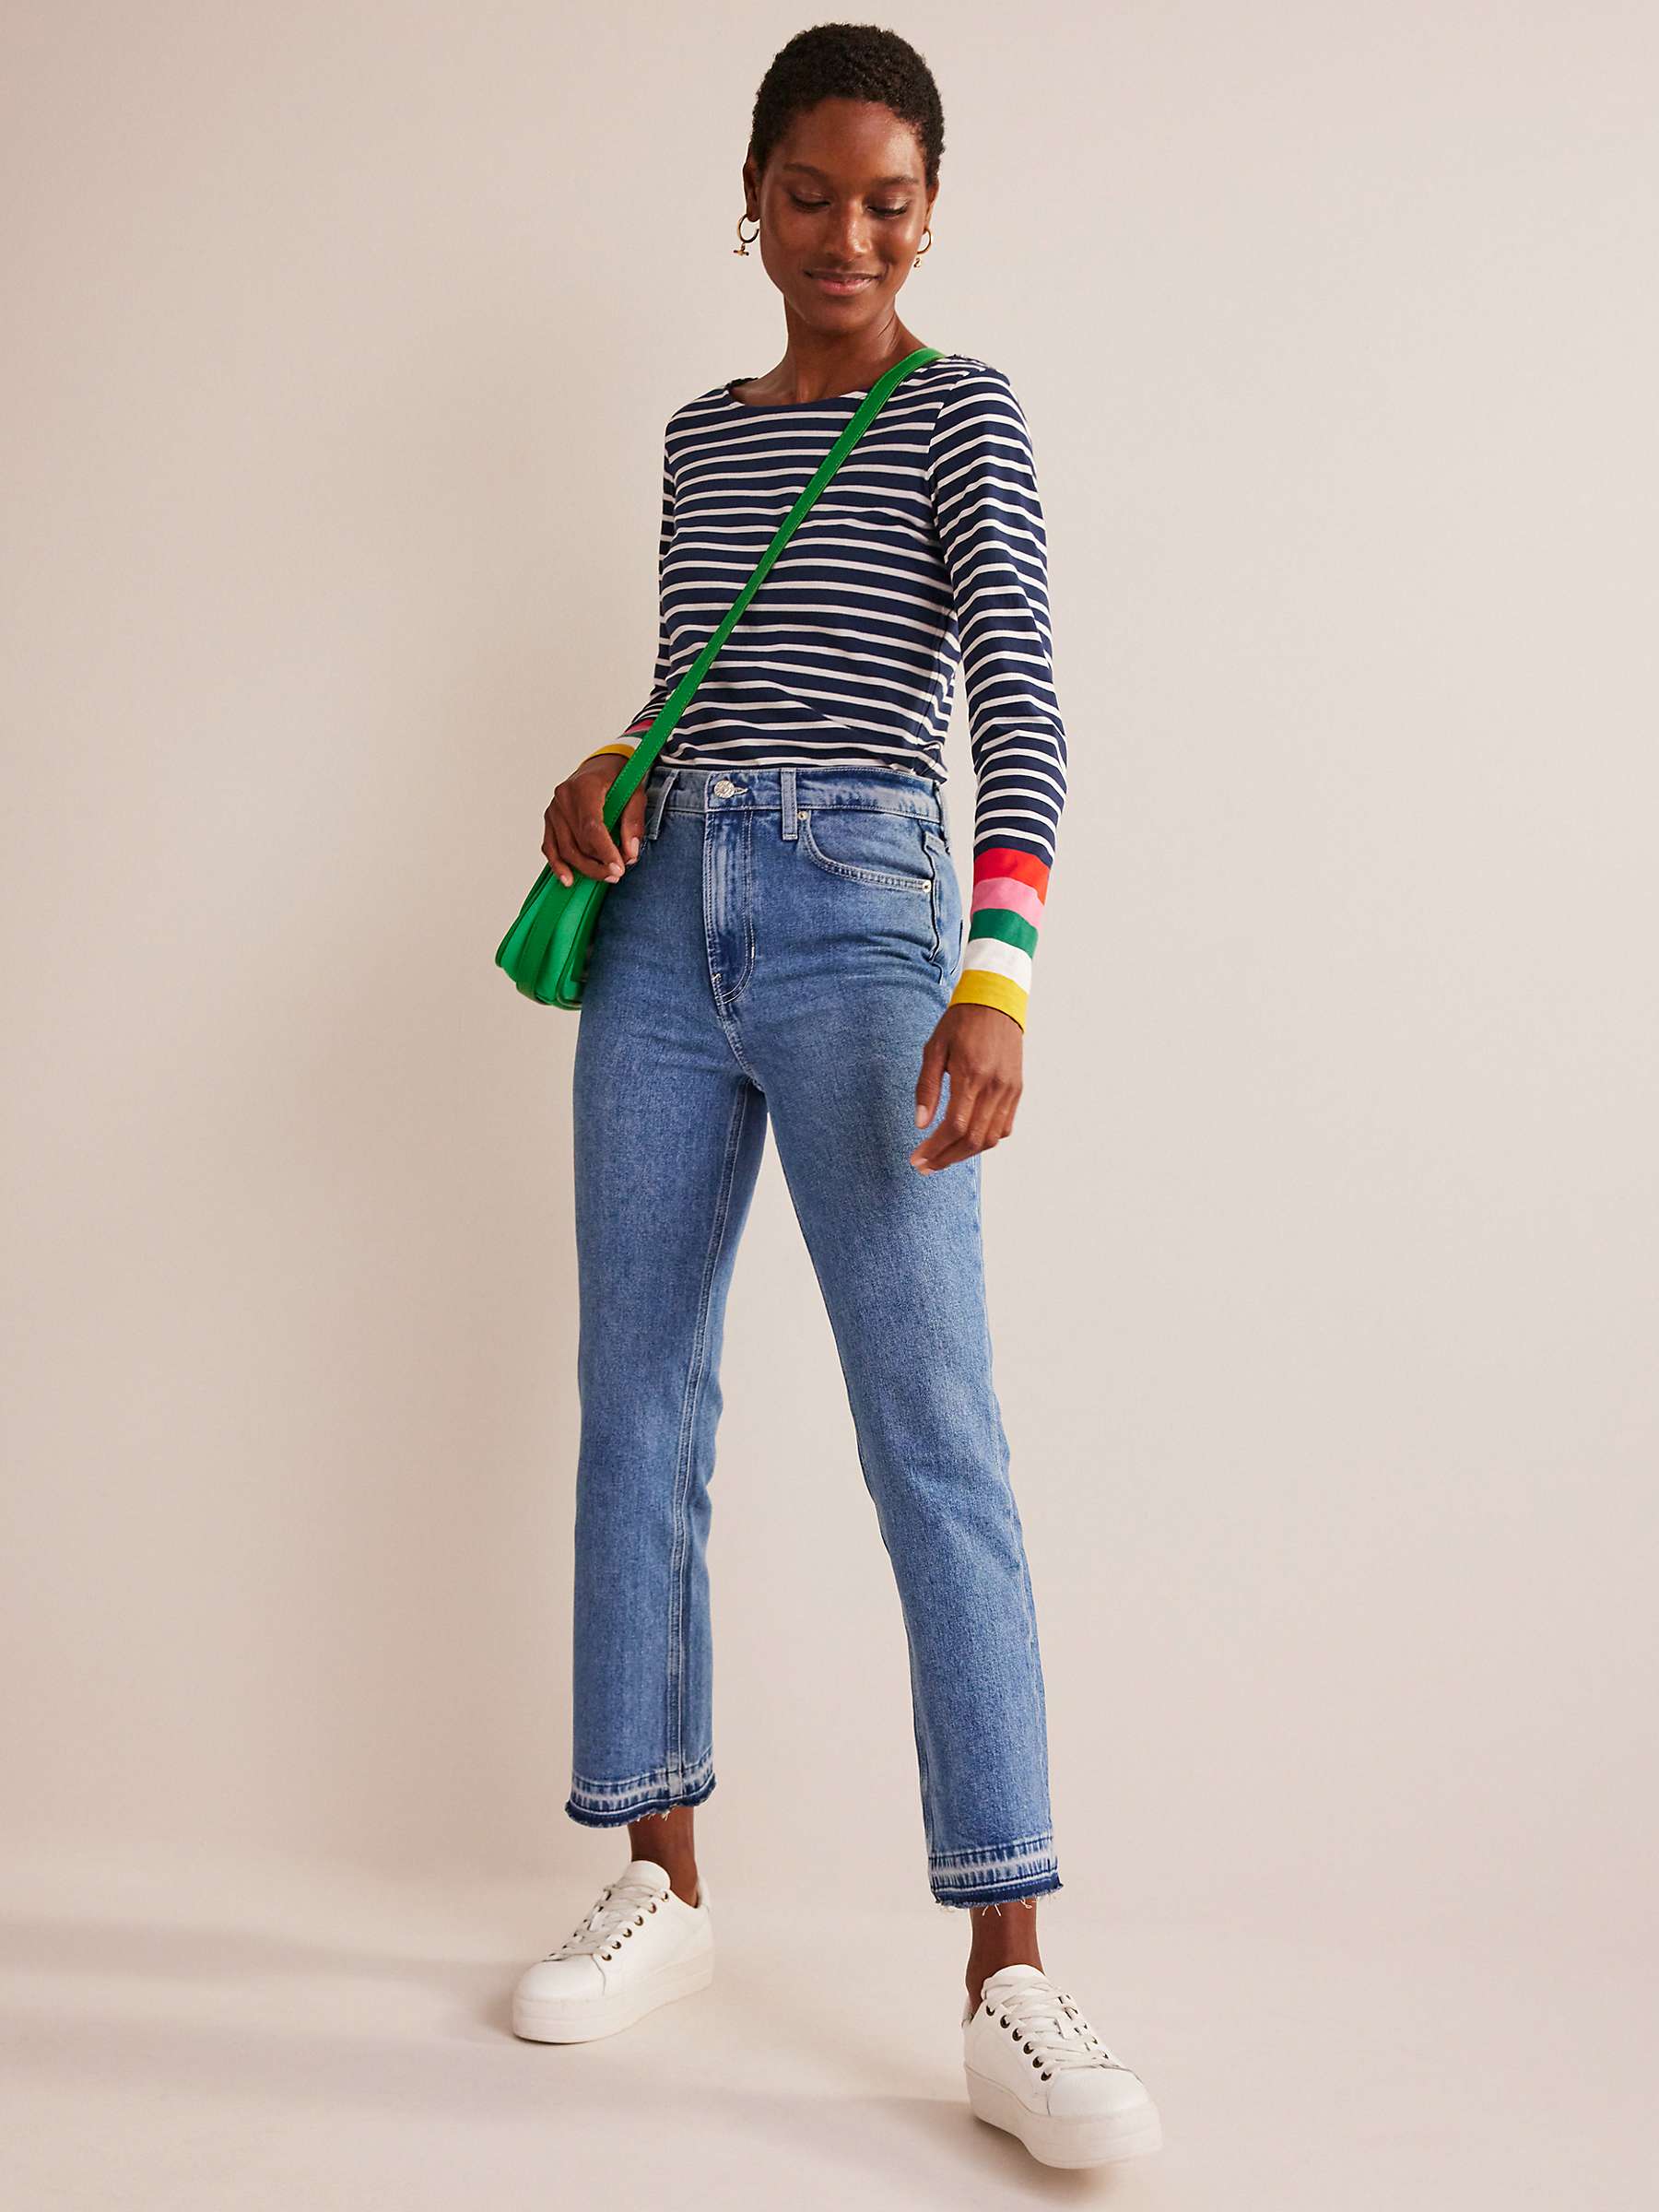 Buy Boden Ava Long Sleeve Cotton Stripe Top, Navy/Multi Cuff Online at johnlewis.com